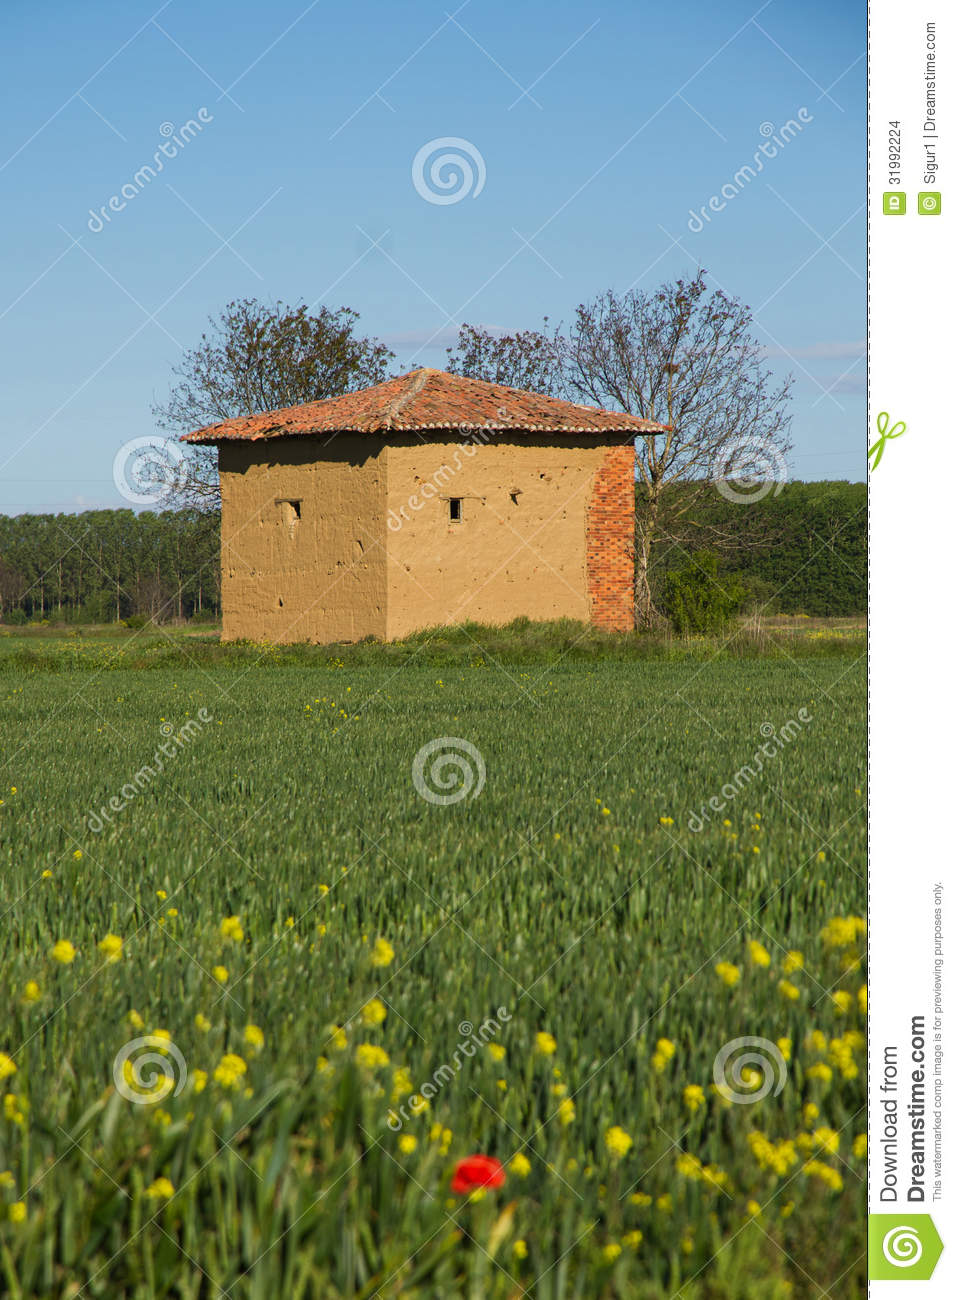 Shed Mud  Adobe  And Brick Amid Sown Grain Field With Poplar Trees In